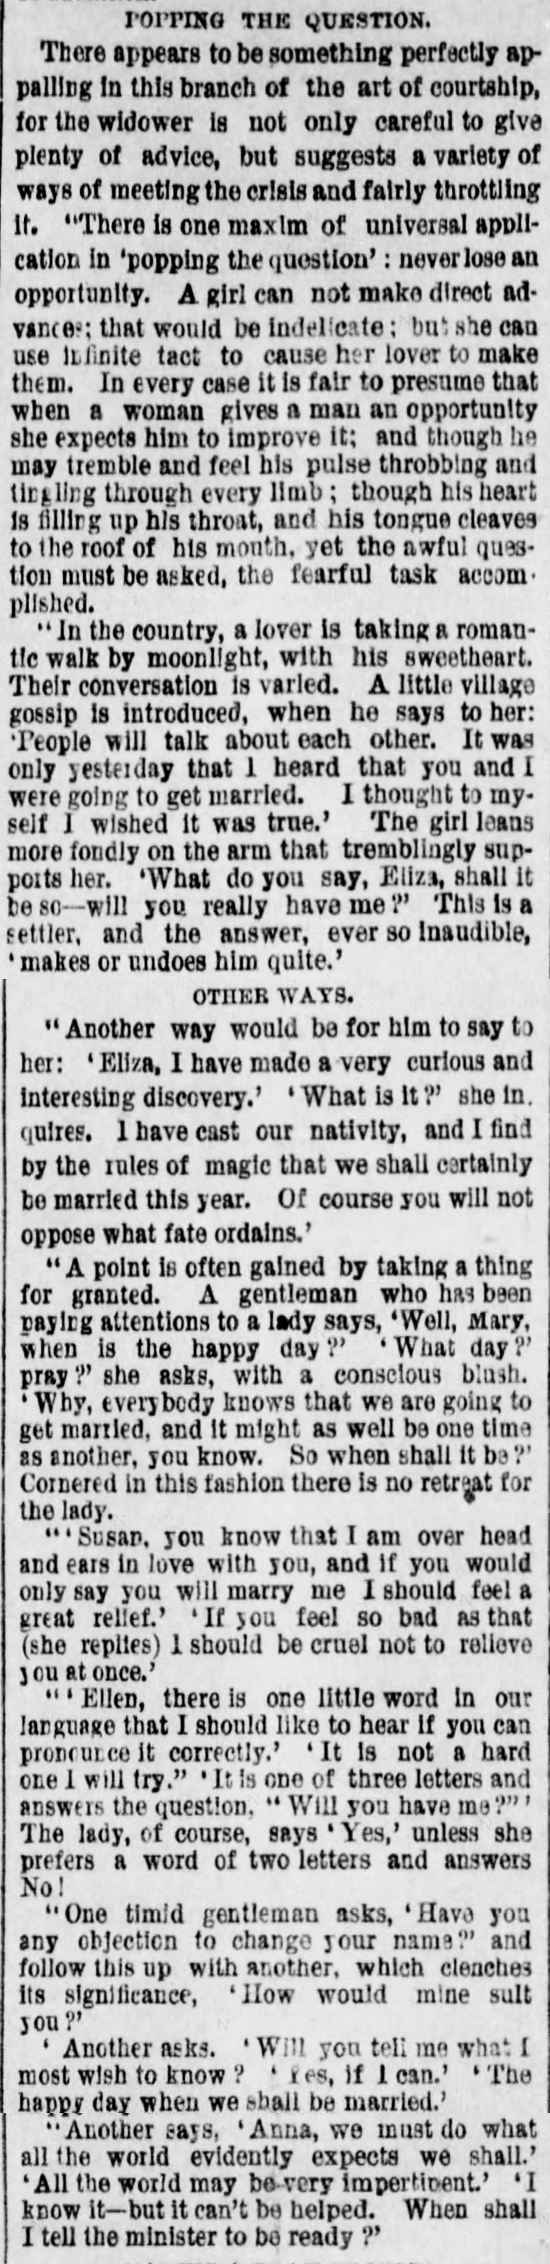 Kristin Holt | The Art of Courtship, Part 11: Popping the Question, from The Des Moines Register of Des Moines, IA on February 20, 1887.